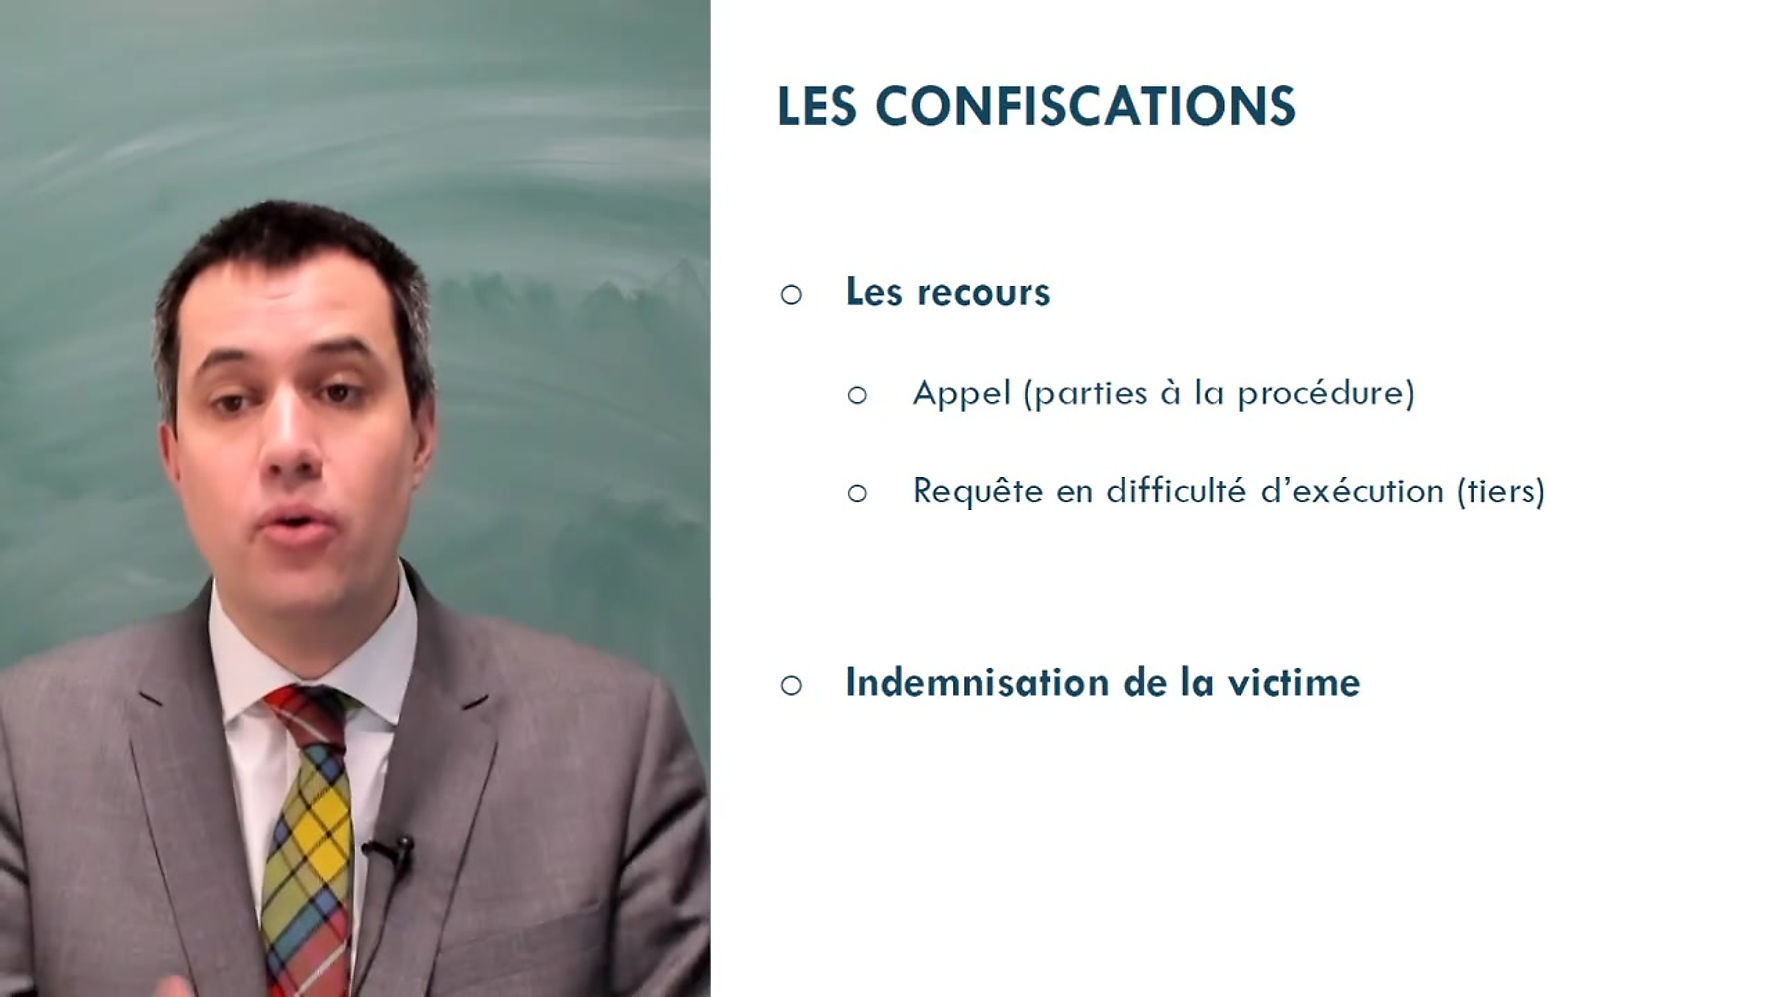 Les confiscations